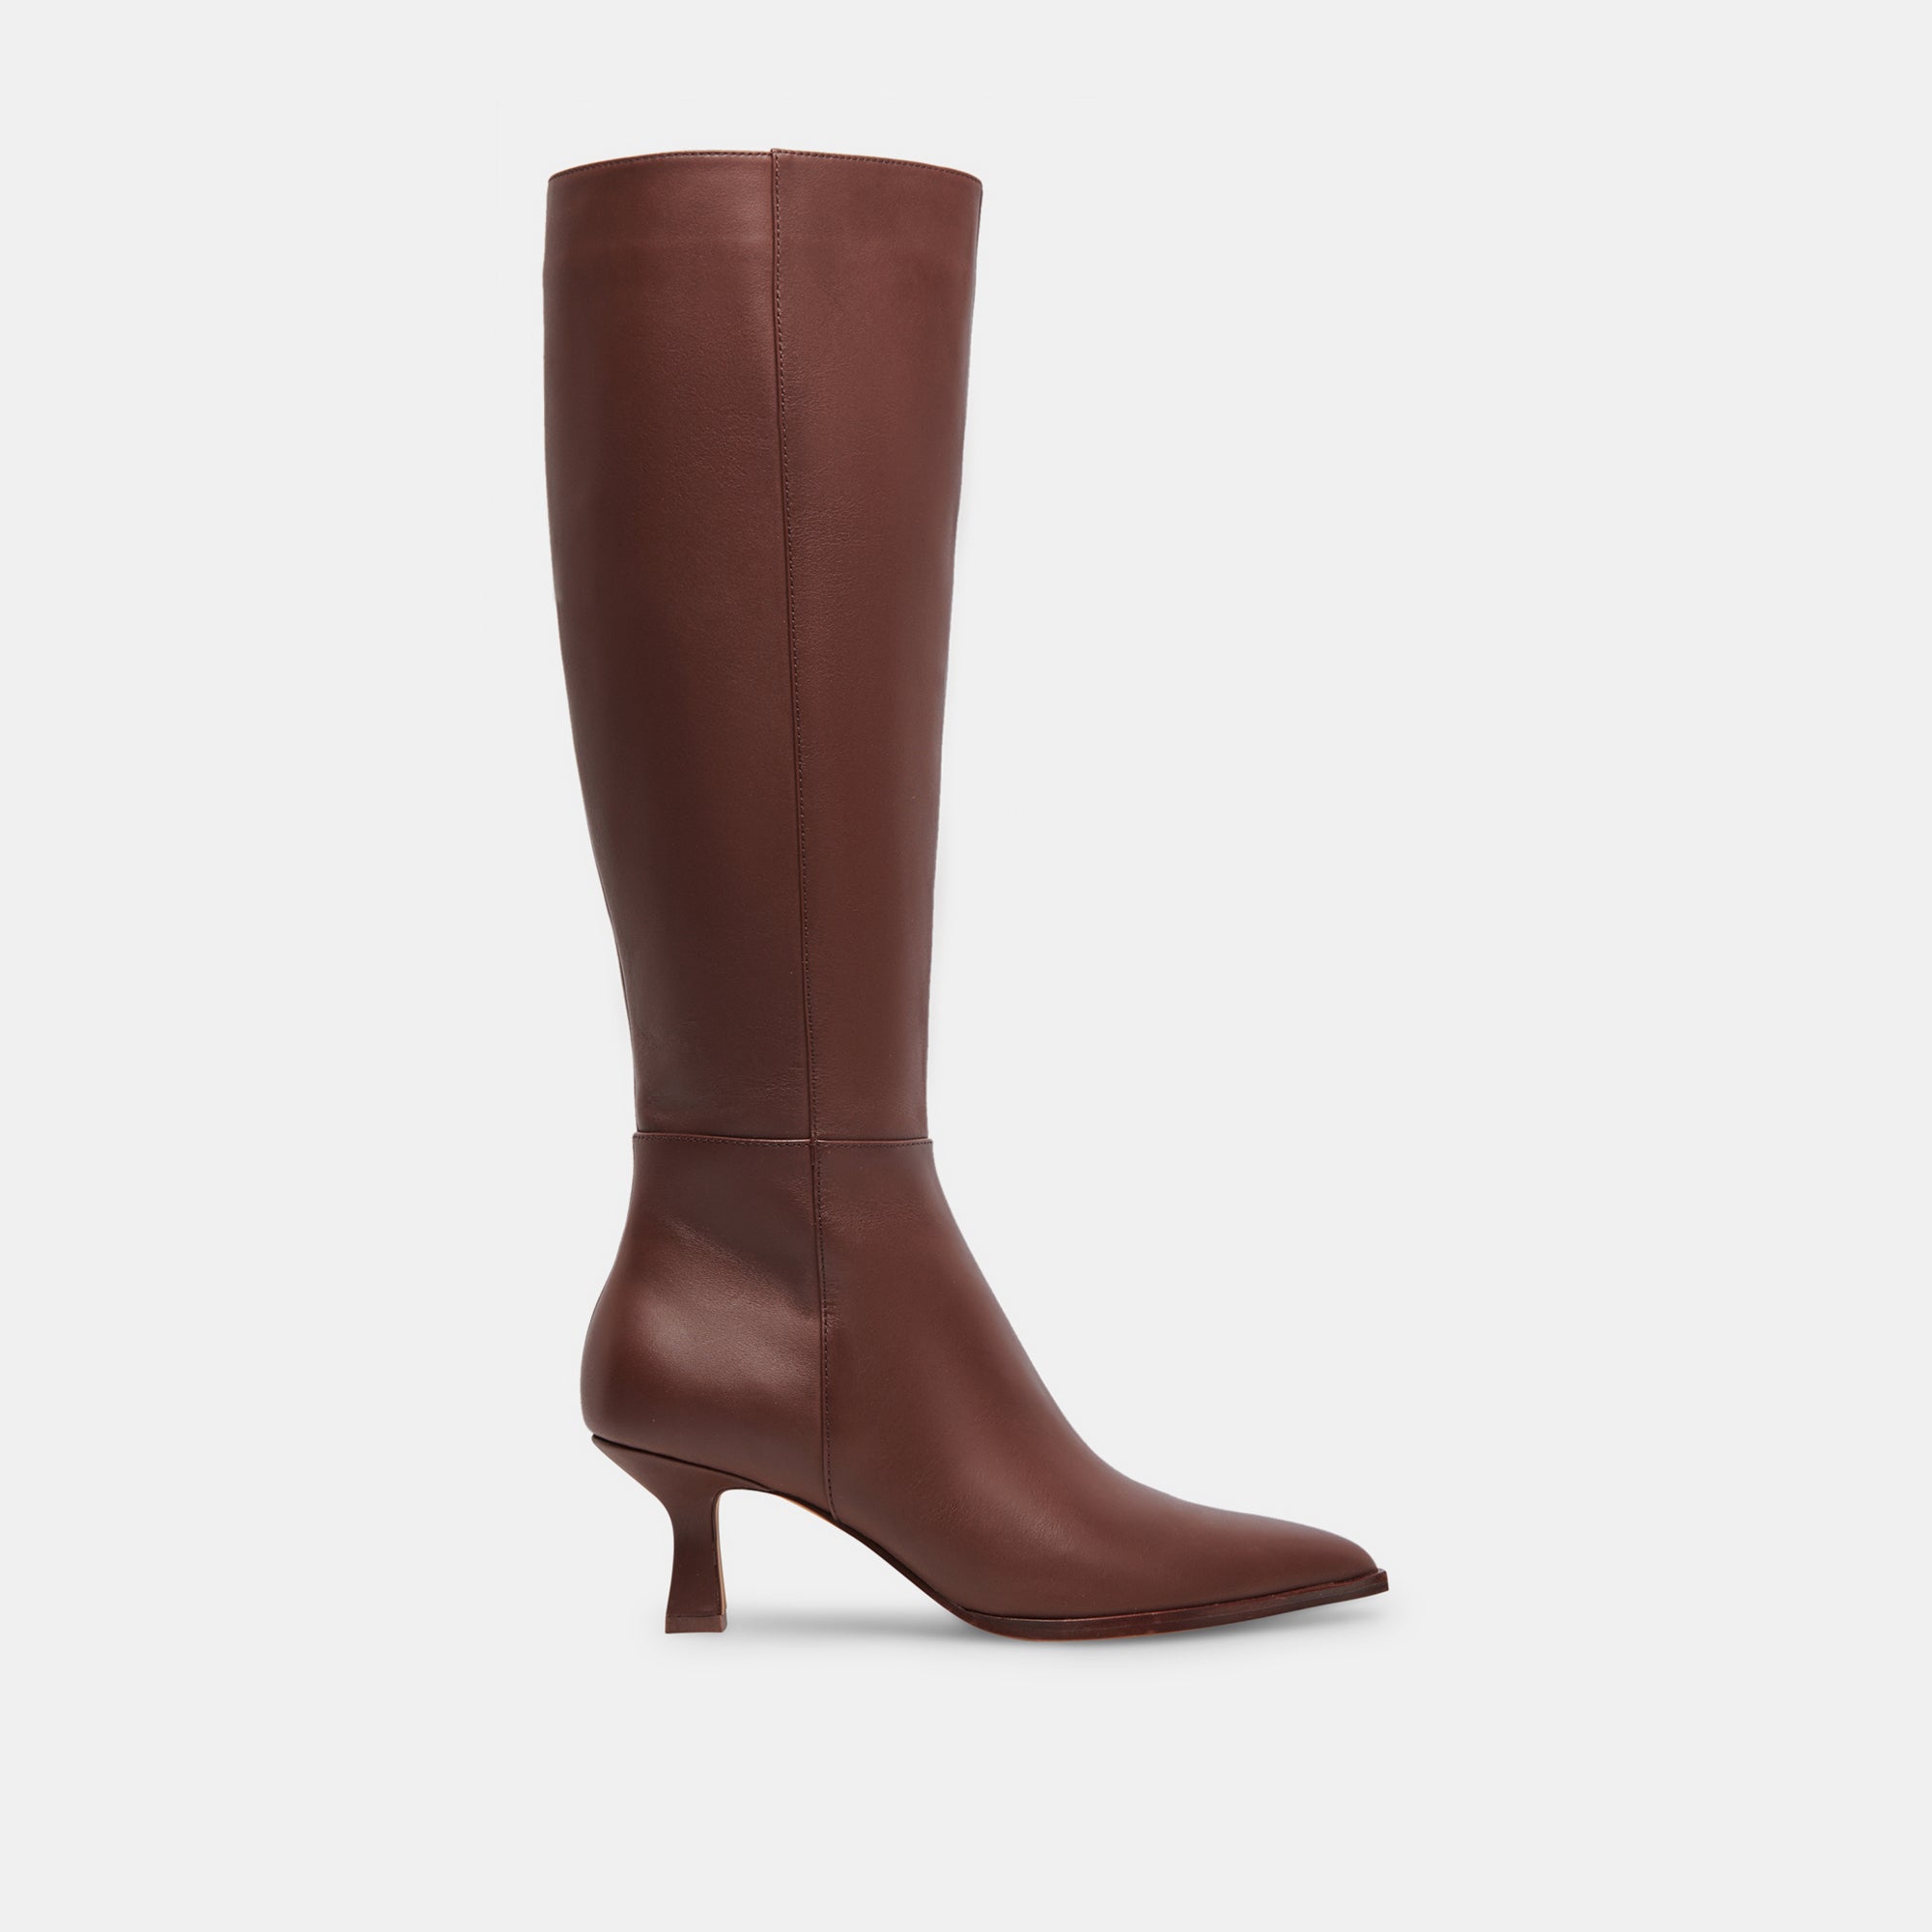 AUGGIE WIDE CALF BOOTS CHOCOLATE LEATHER